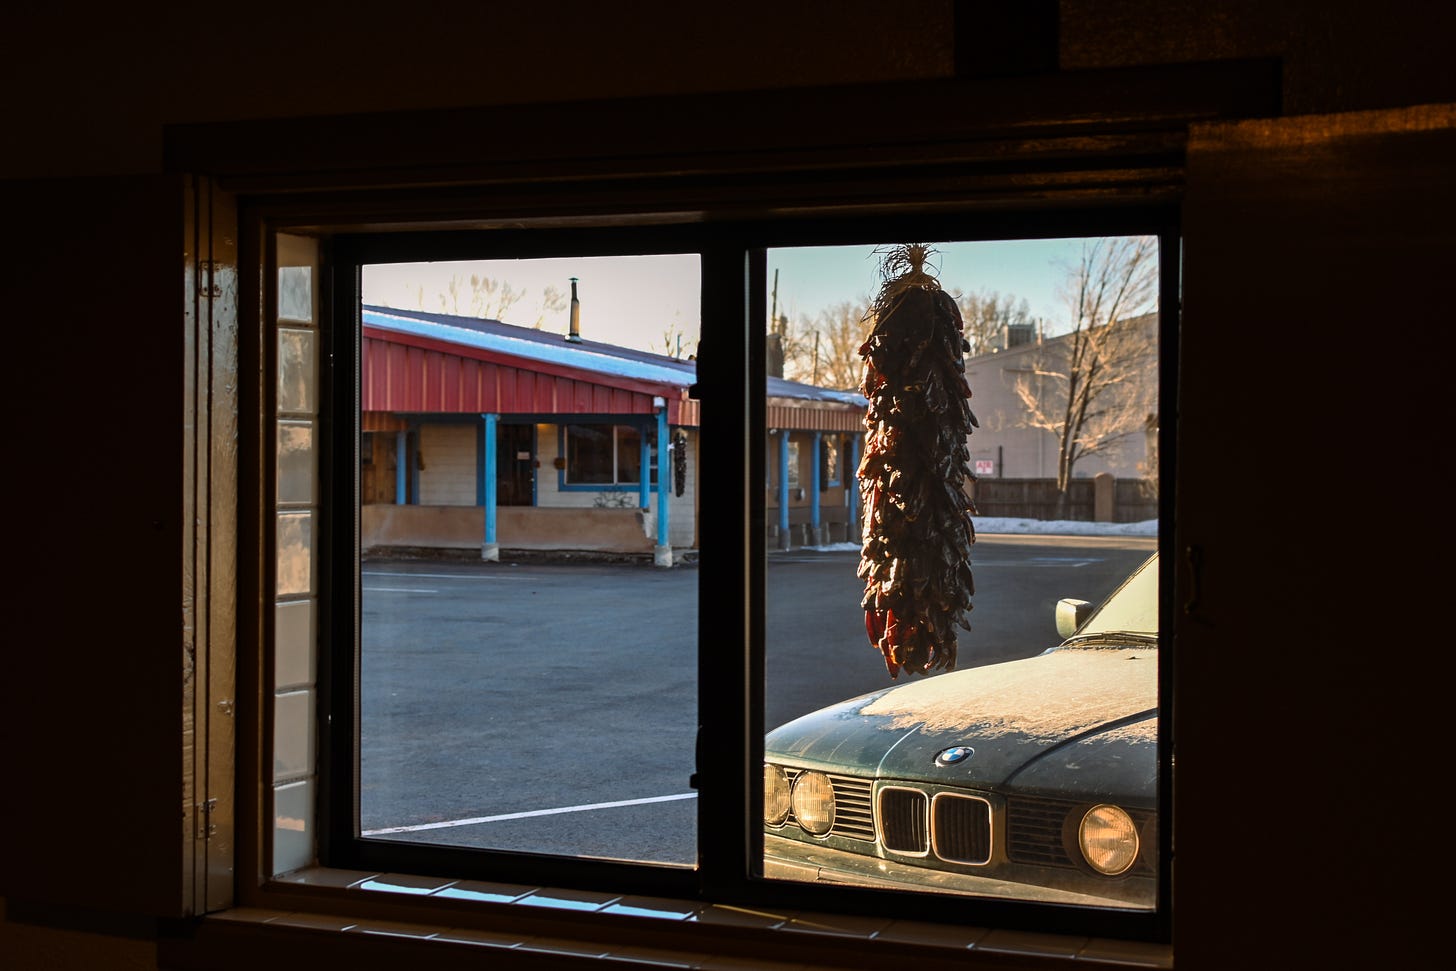 Looking out the motel window, a bundle of chilli peppers hangs from the overhang.